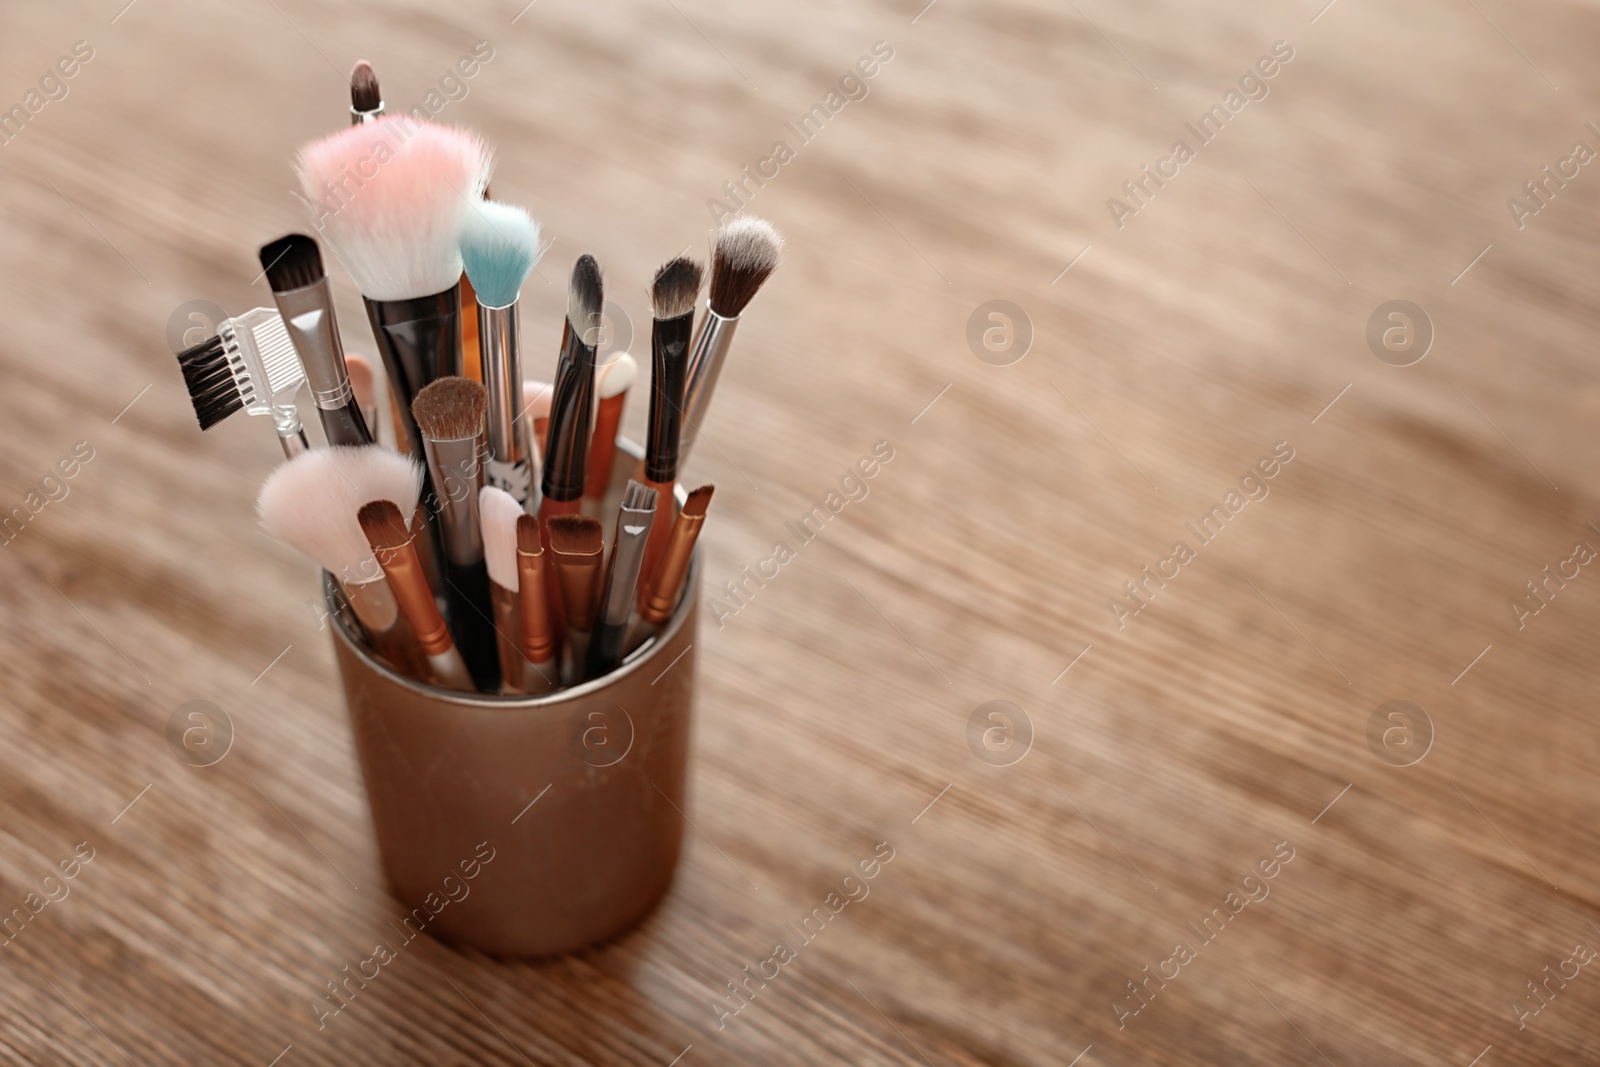 Photo of Holder with makeup brushes on wooden table